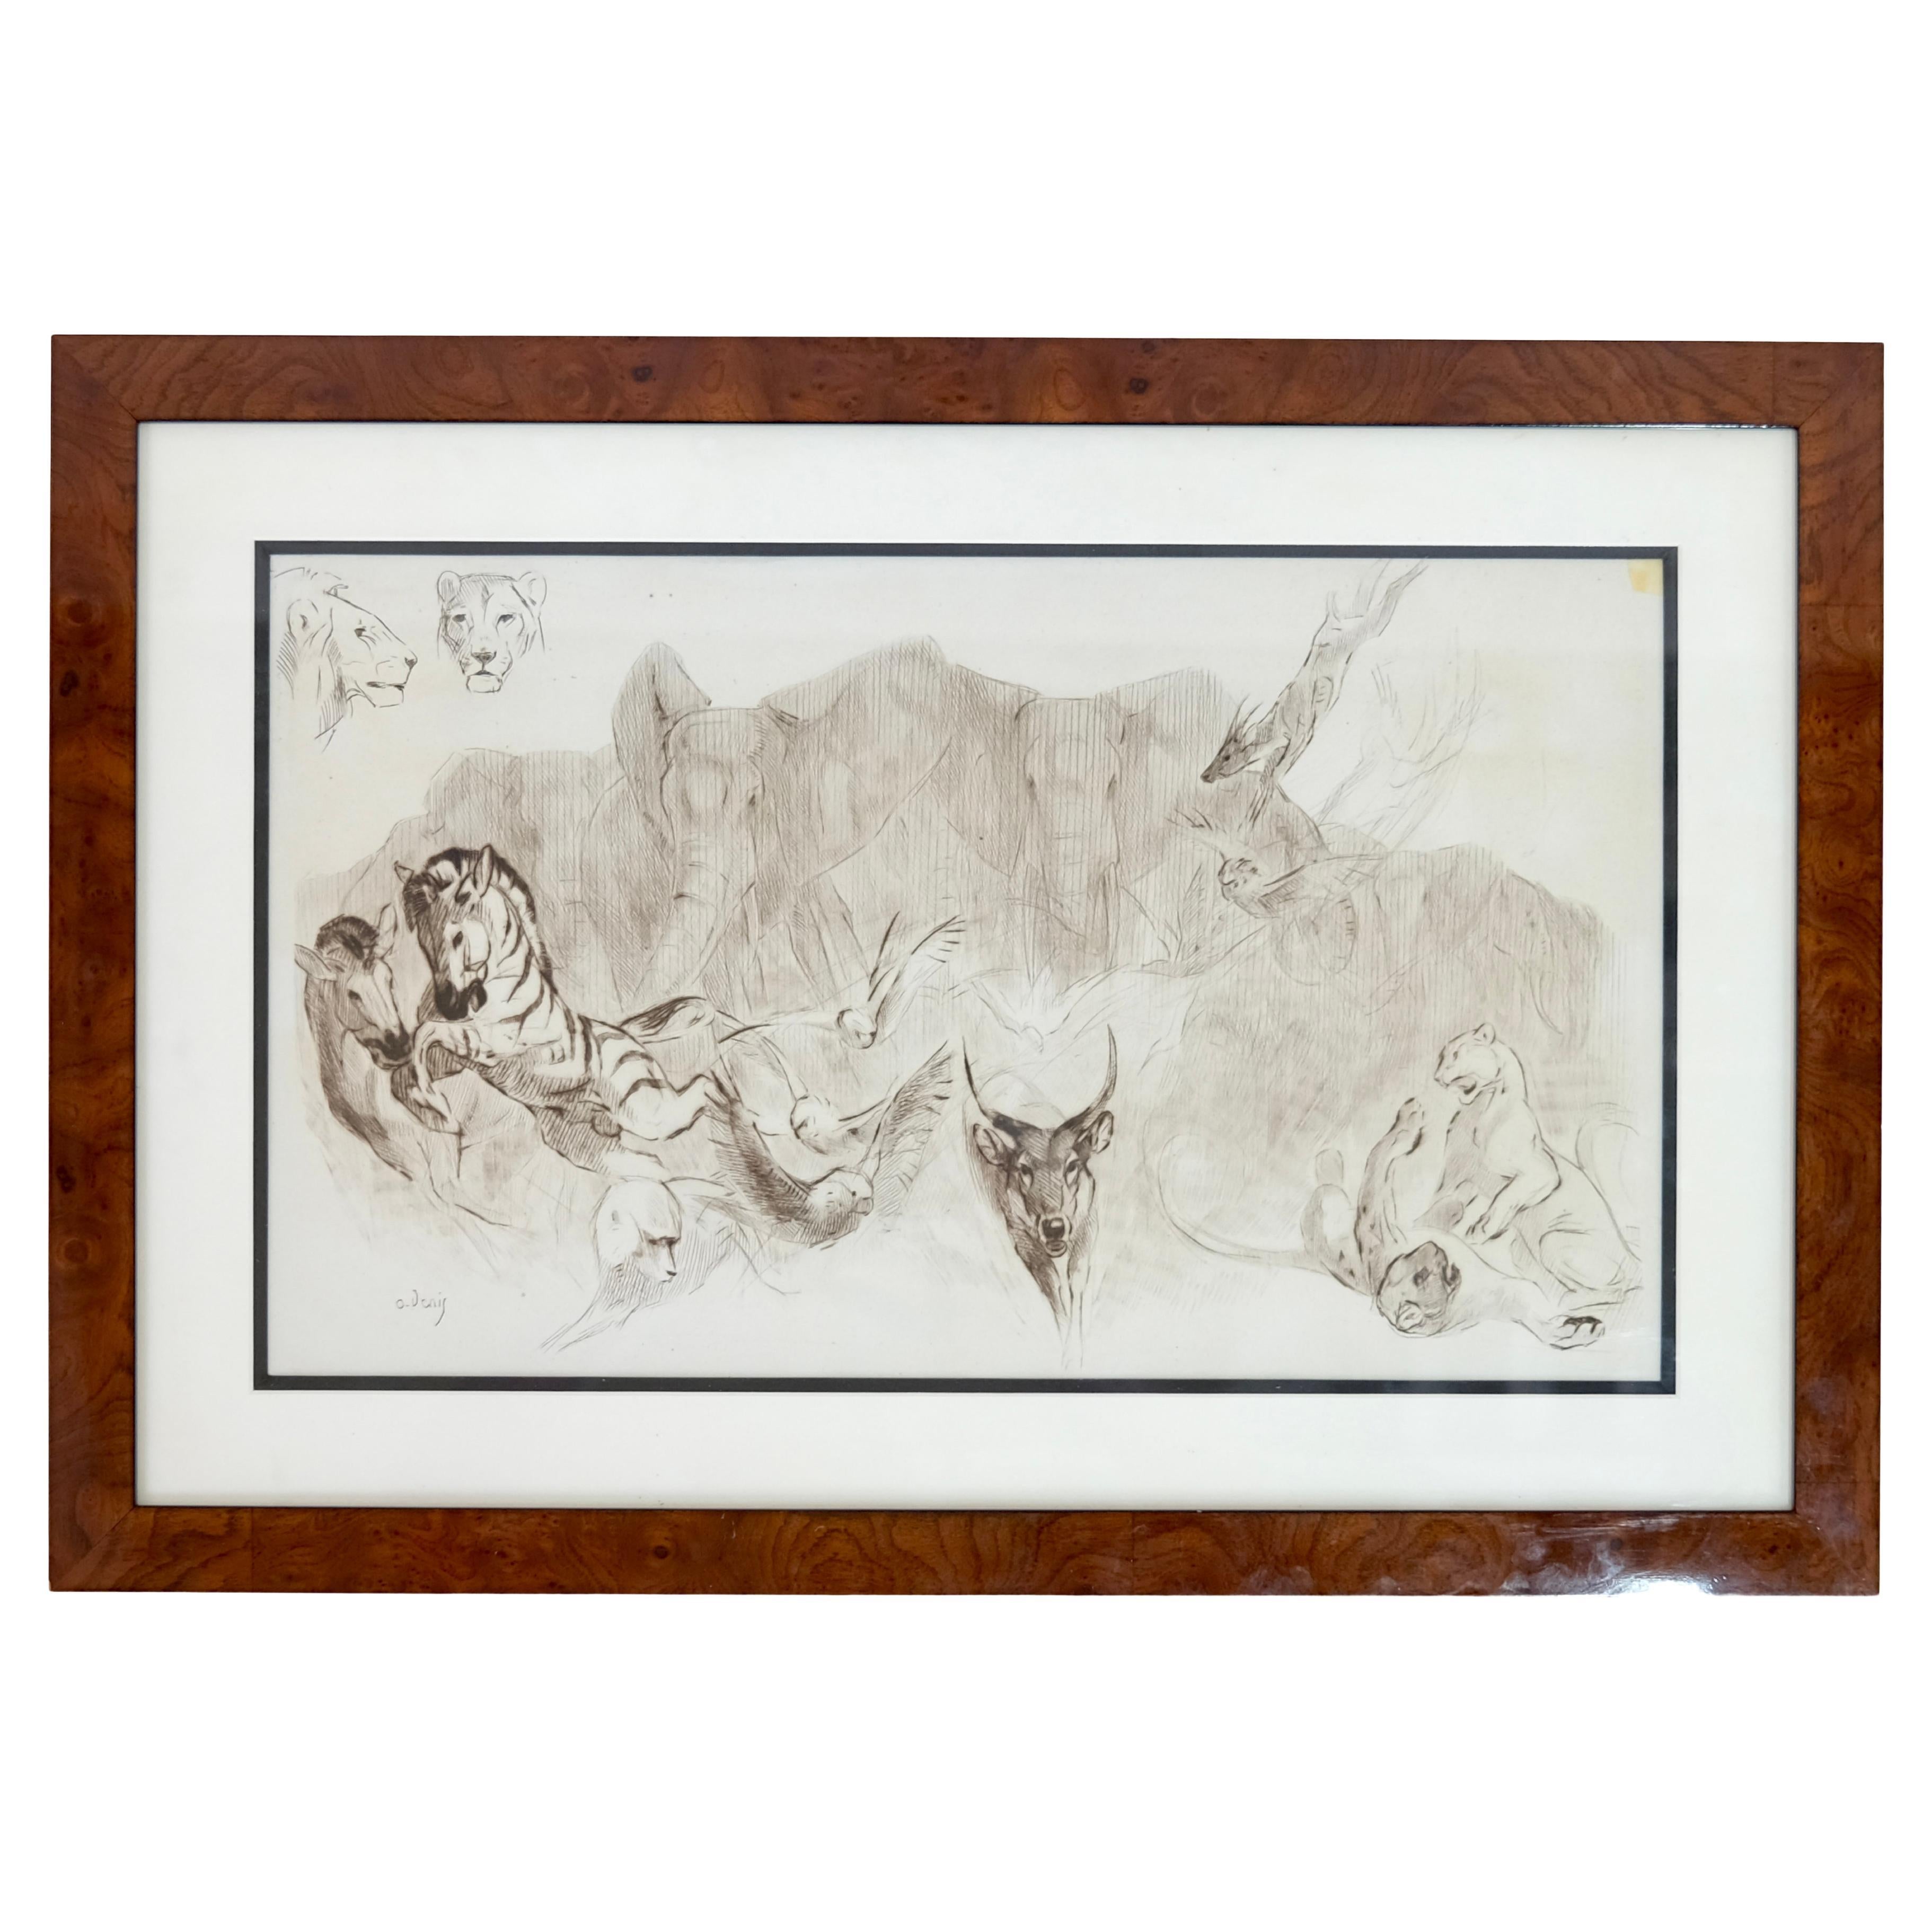 Etudes d'Animaux Sauvages, Etching and Drypoint by Odette Denis